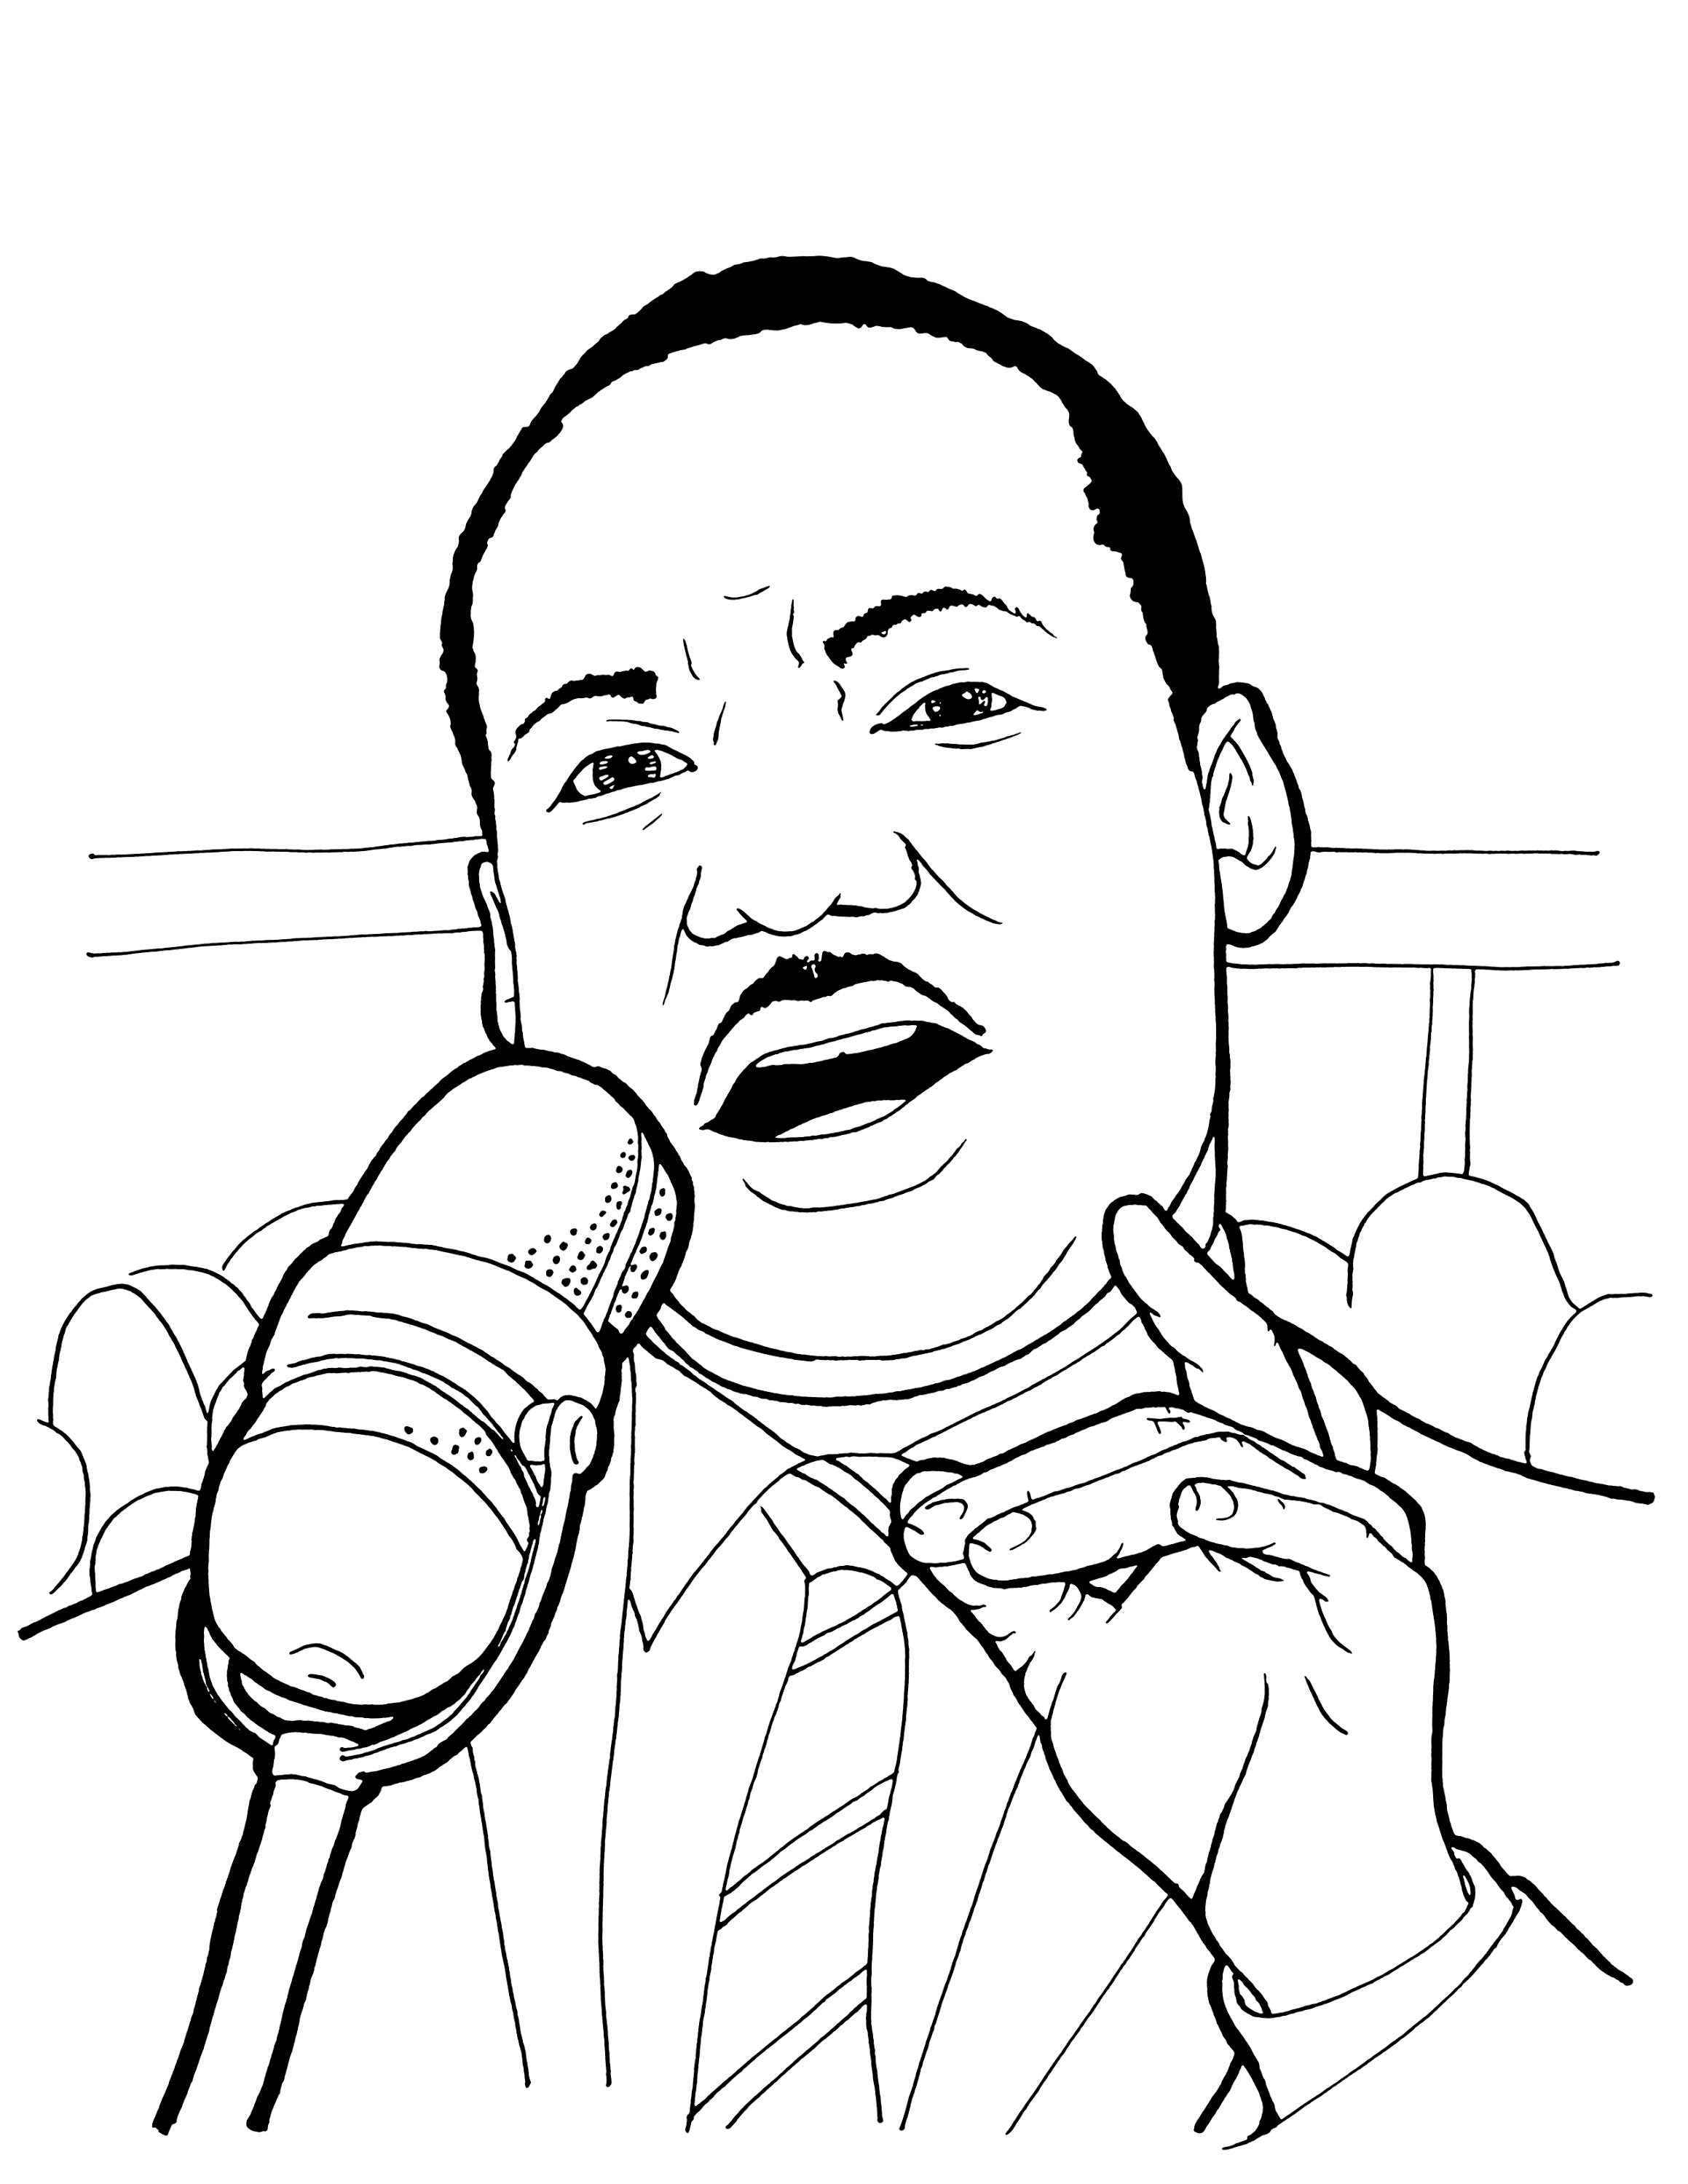 Mlk clipart simple, Mlk simple Transparent FREE for download on